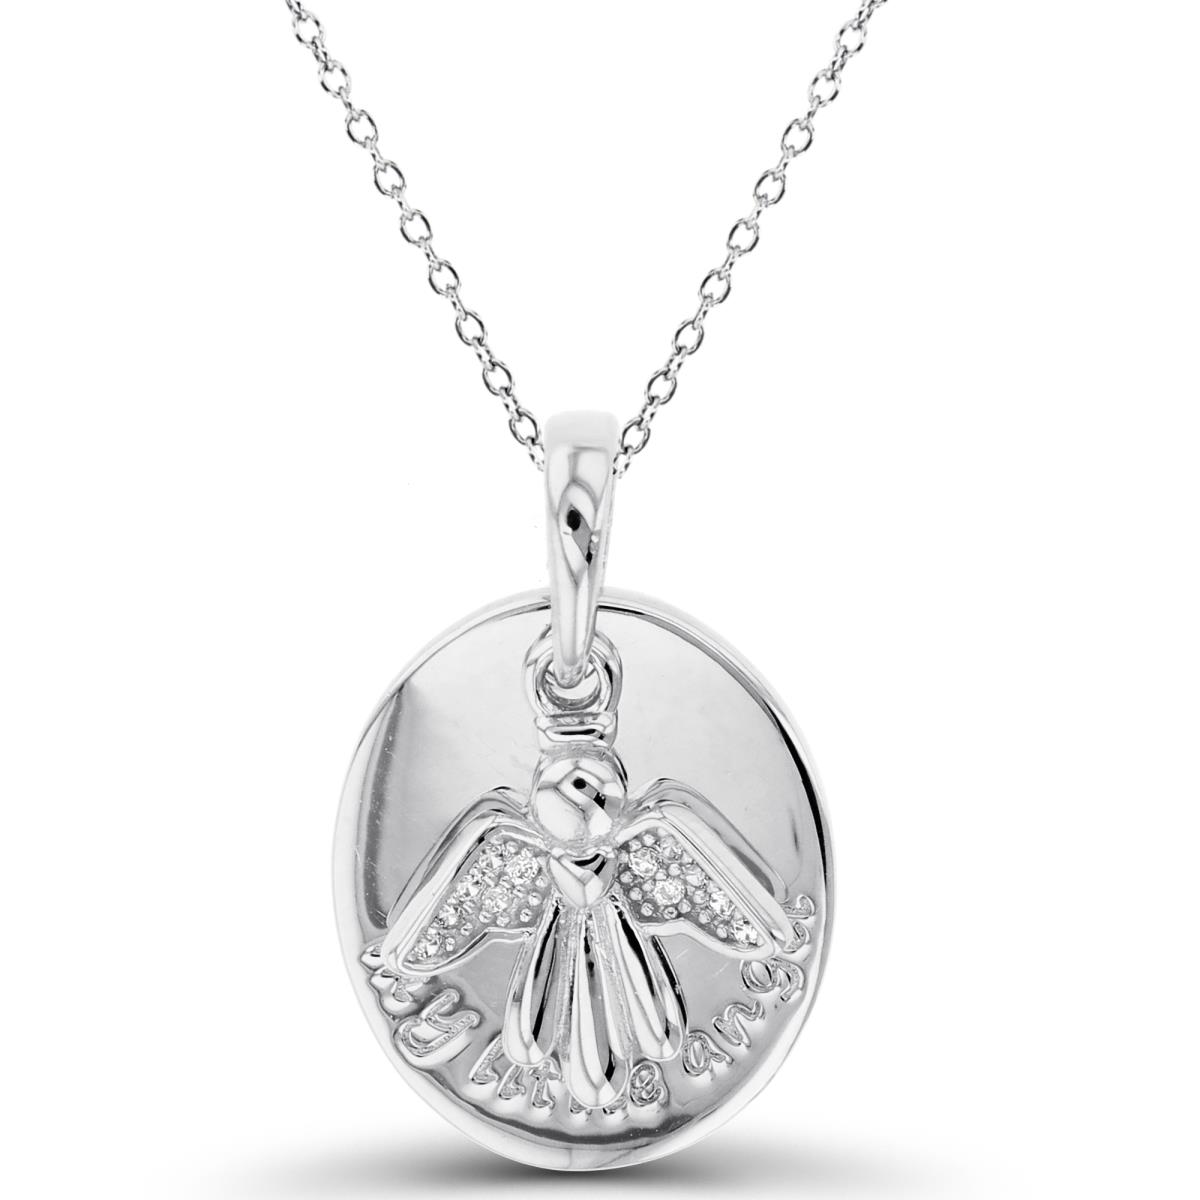 Sterling Silver Rhodium High Polish Engraved Oval with DanglingTextured Rnd White CZ Angel 18"Necklace